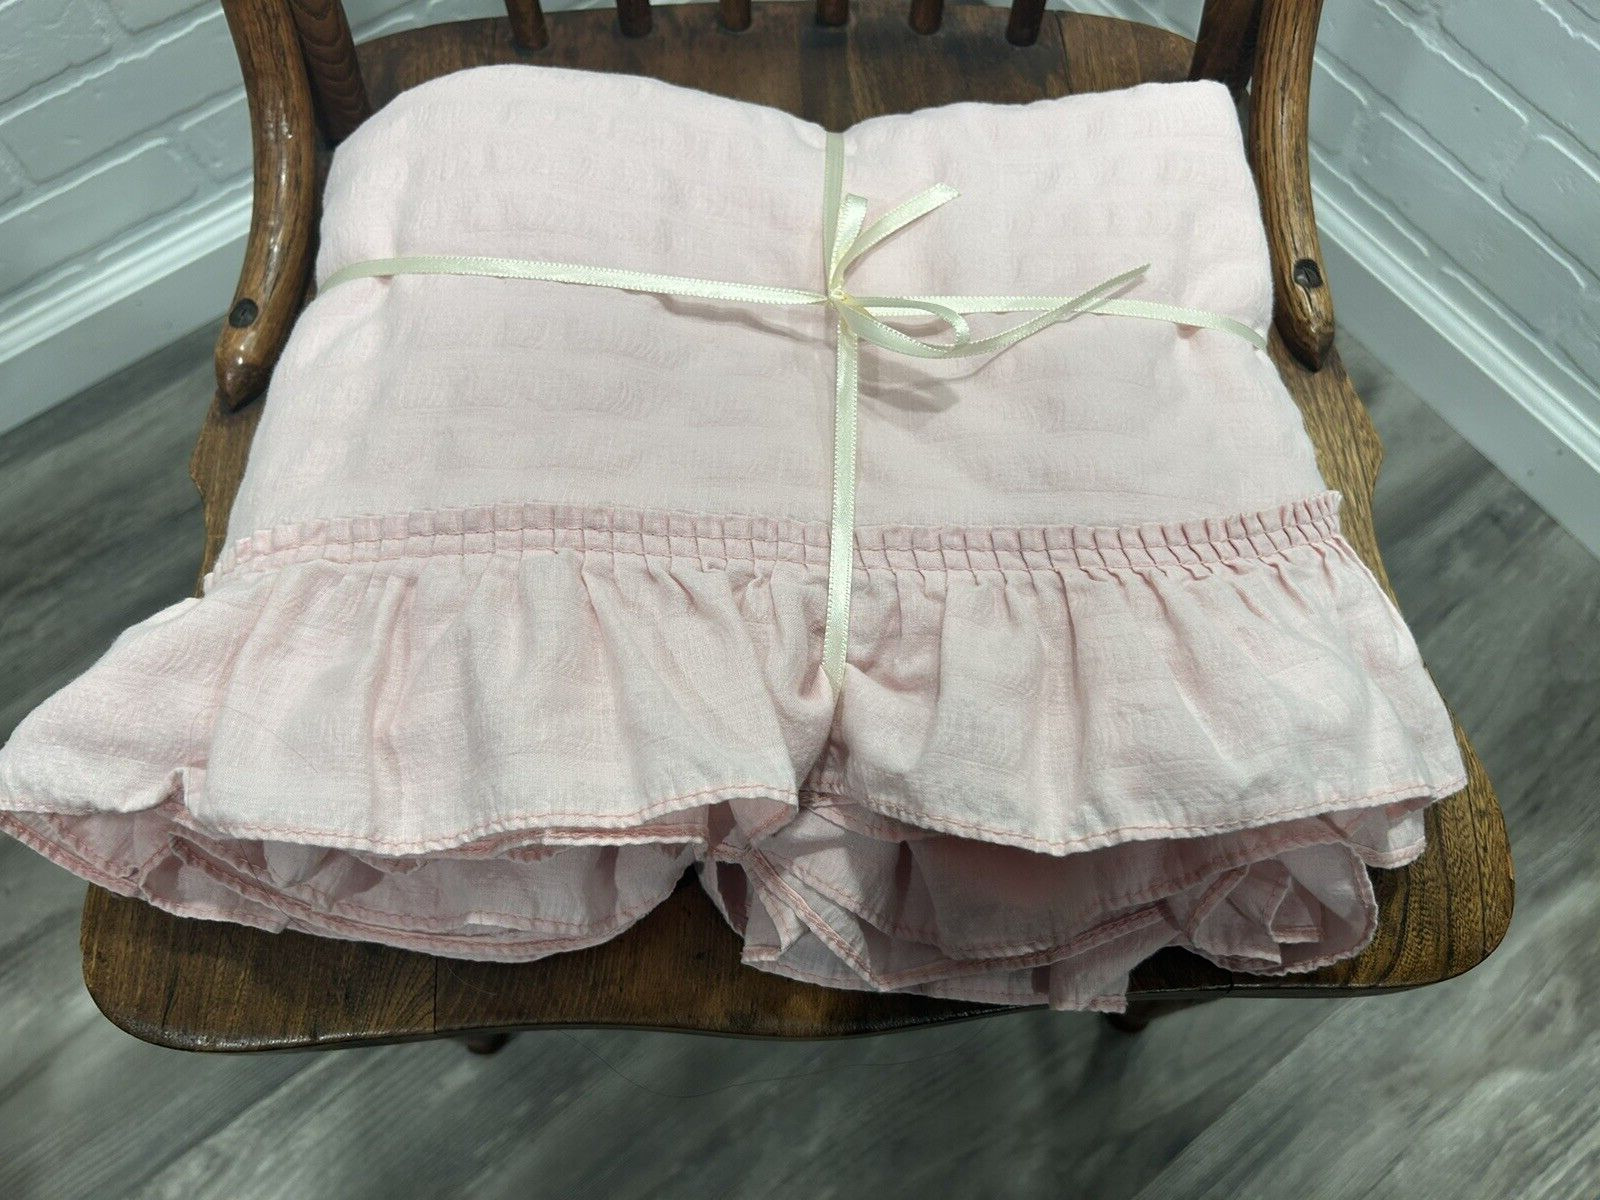 Vintage Ruffled Coverlet-Pink-Shabby Style-Cottagecore-Grannycore-Pink-Twin